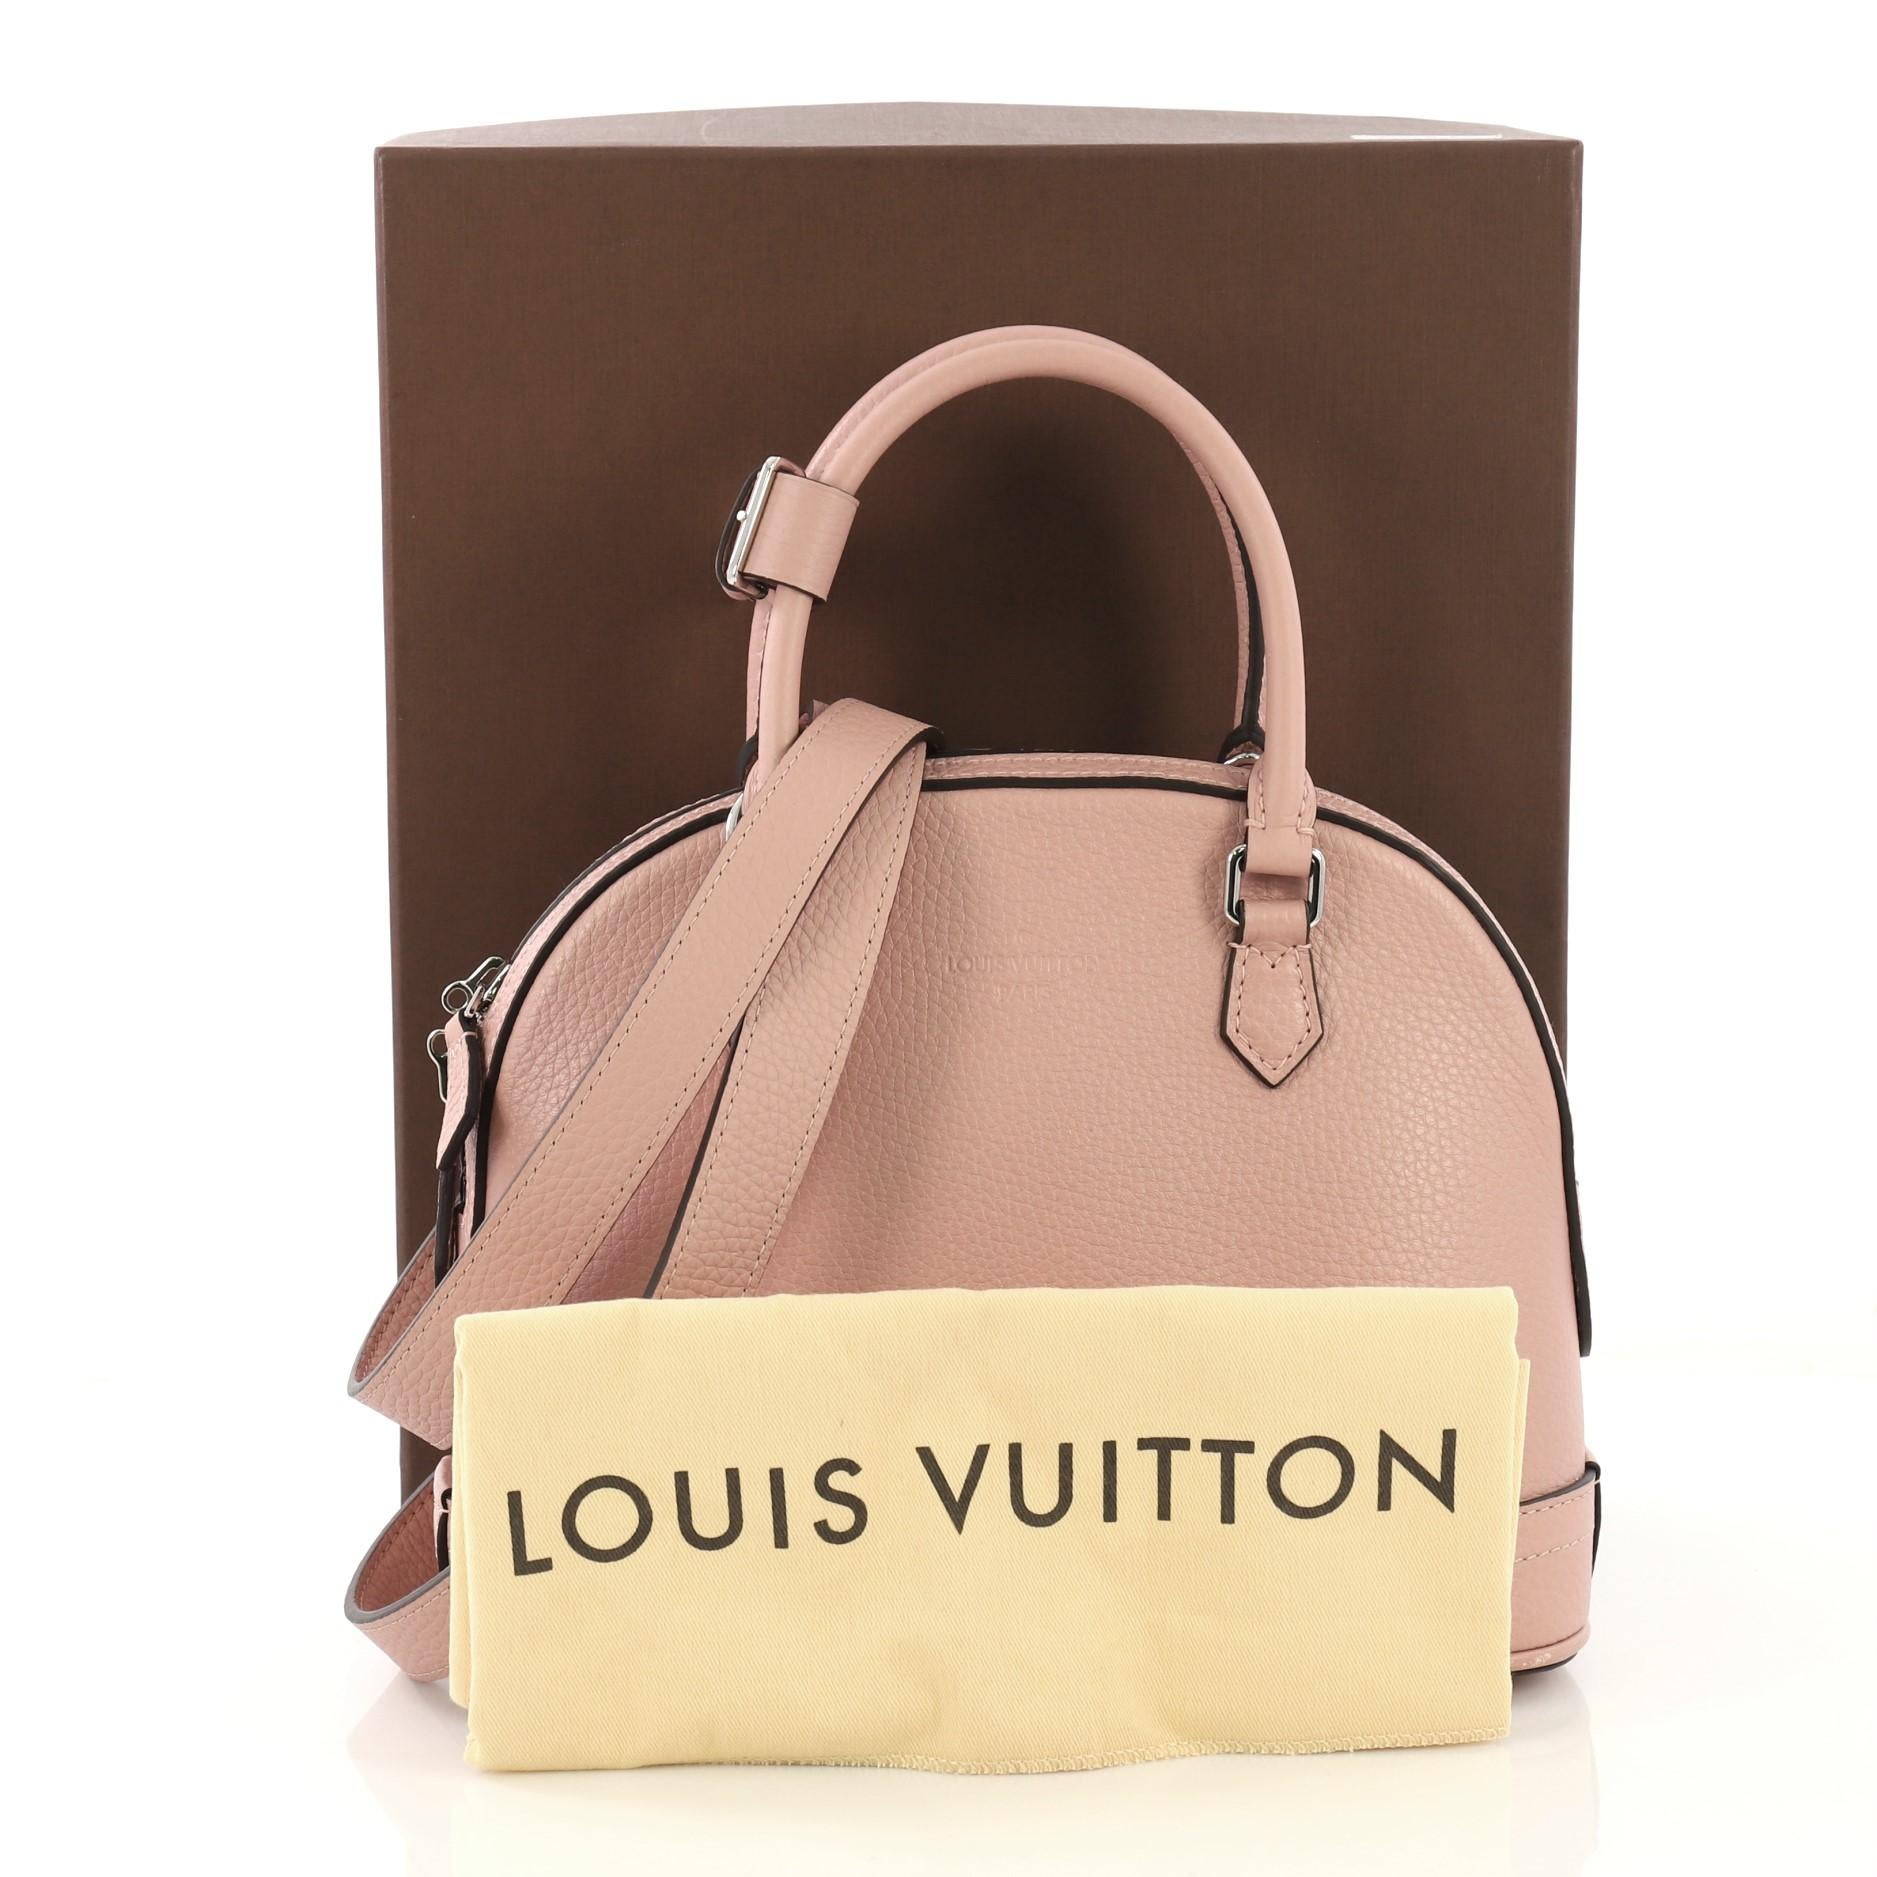 This Louis Vuitton Parnassea Alma Handbag Taurillon Leather PPM, crafted in pink taurillon leather, features dual rolled handles, and silver-tone hardware. Its zip around closure opens to a taupe suede interior with zip and slip pockets.